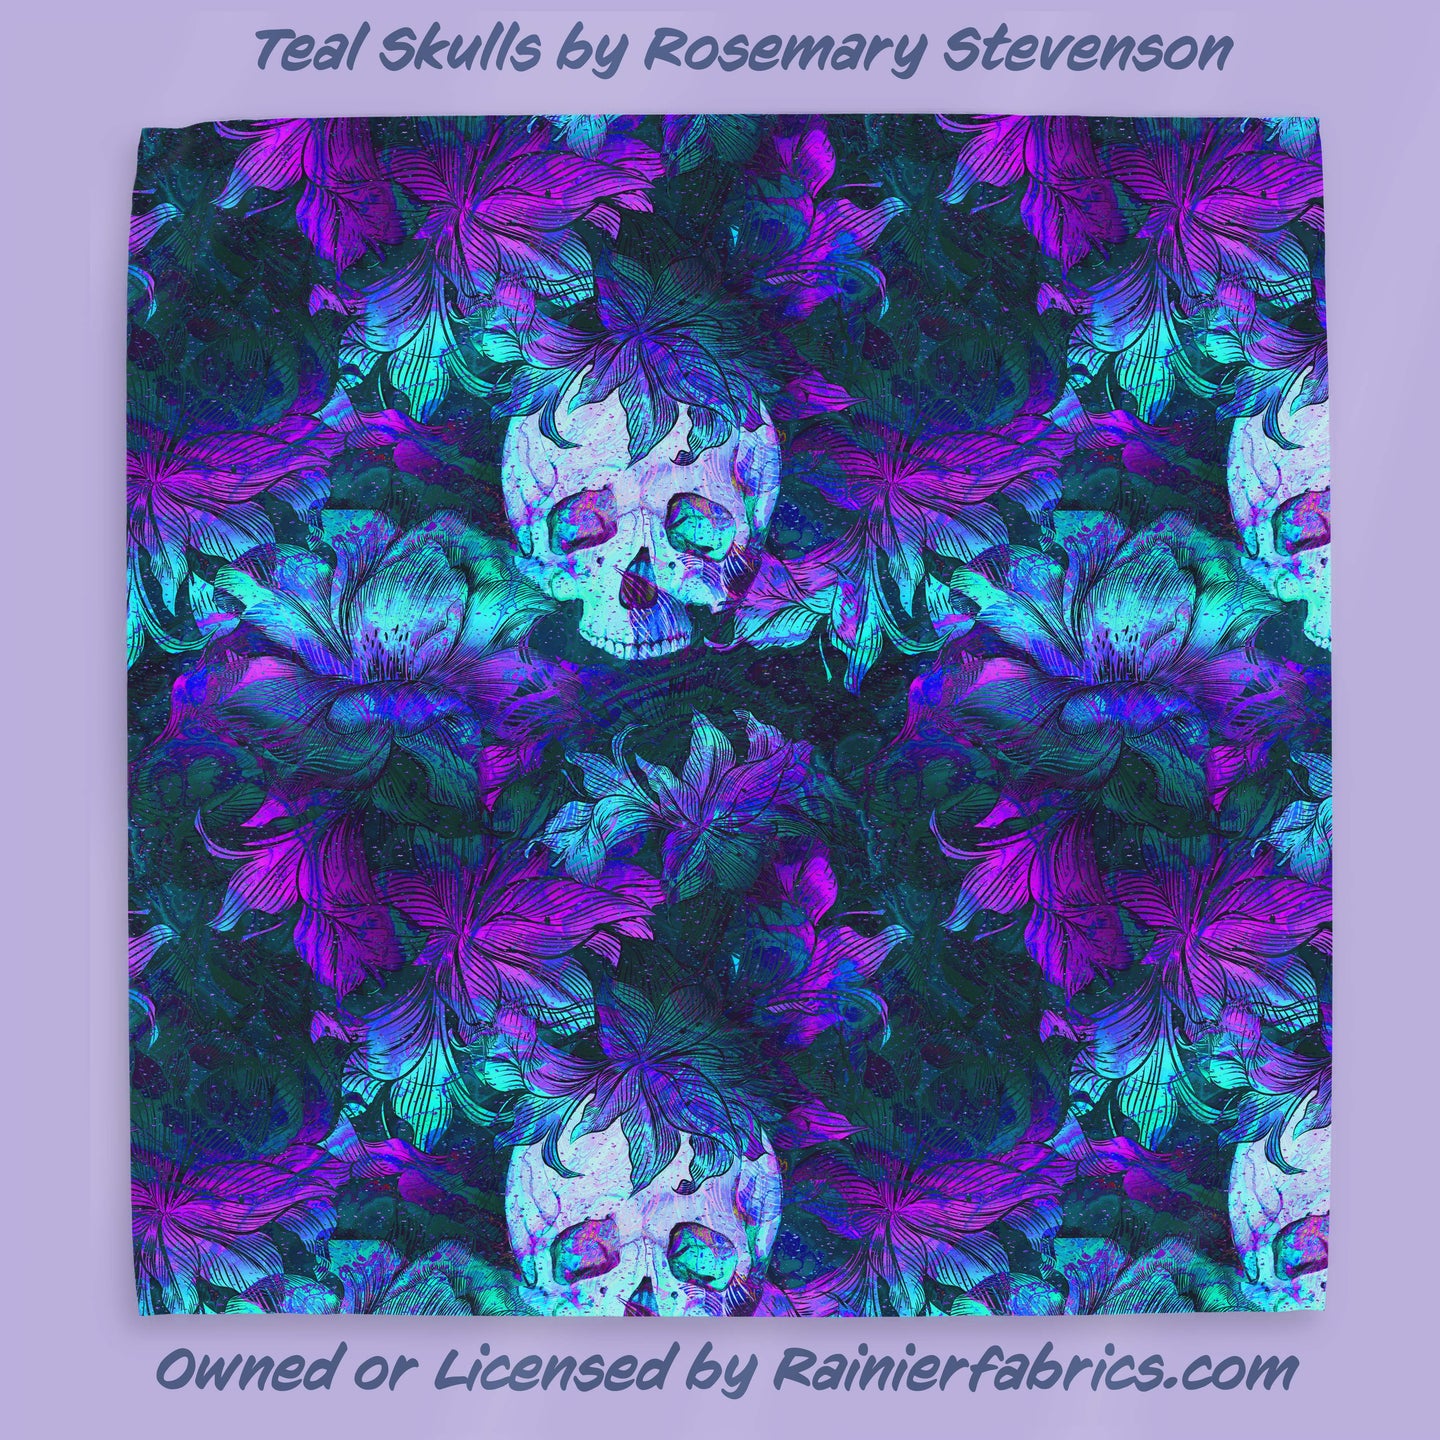 Mystery Skulls and more by Rosemary Stevenson - 2-5 day TAT - Order by 1/2 yard; Blankets and towels available too